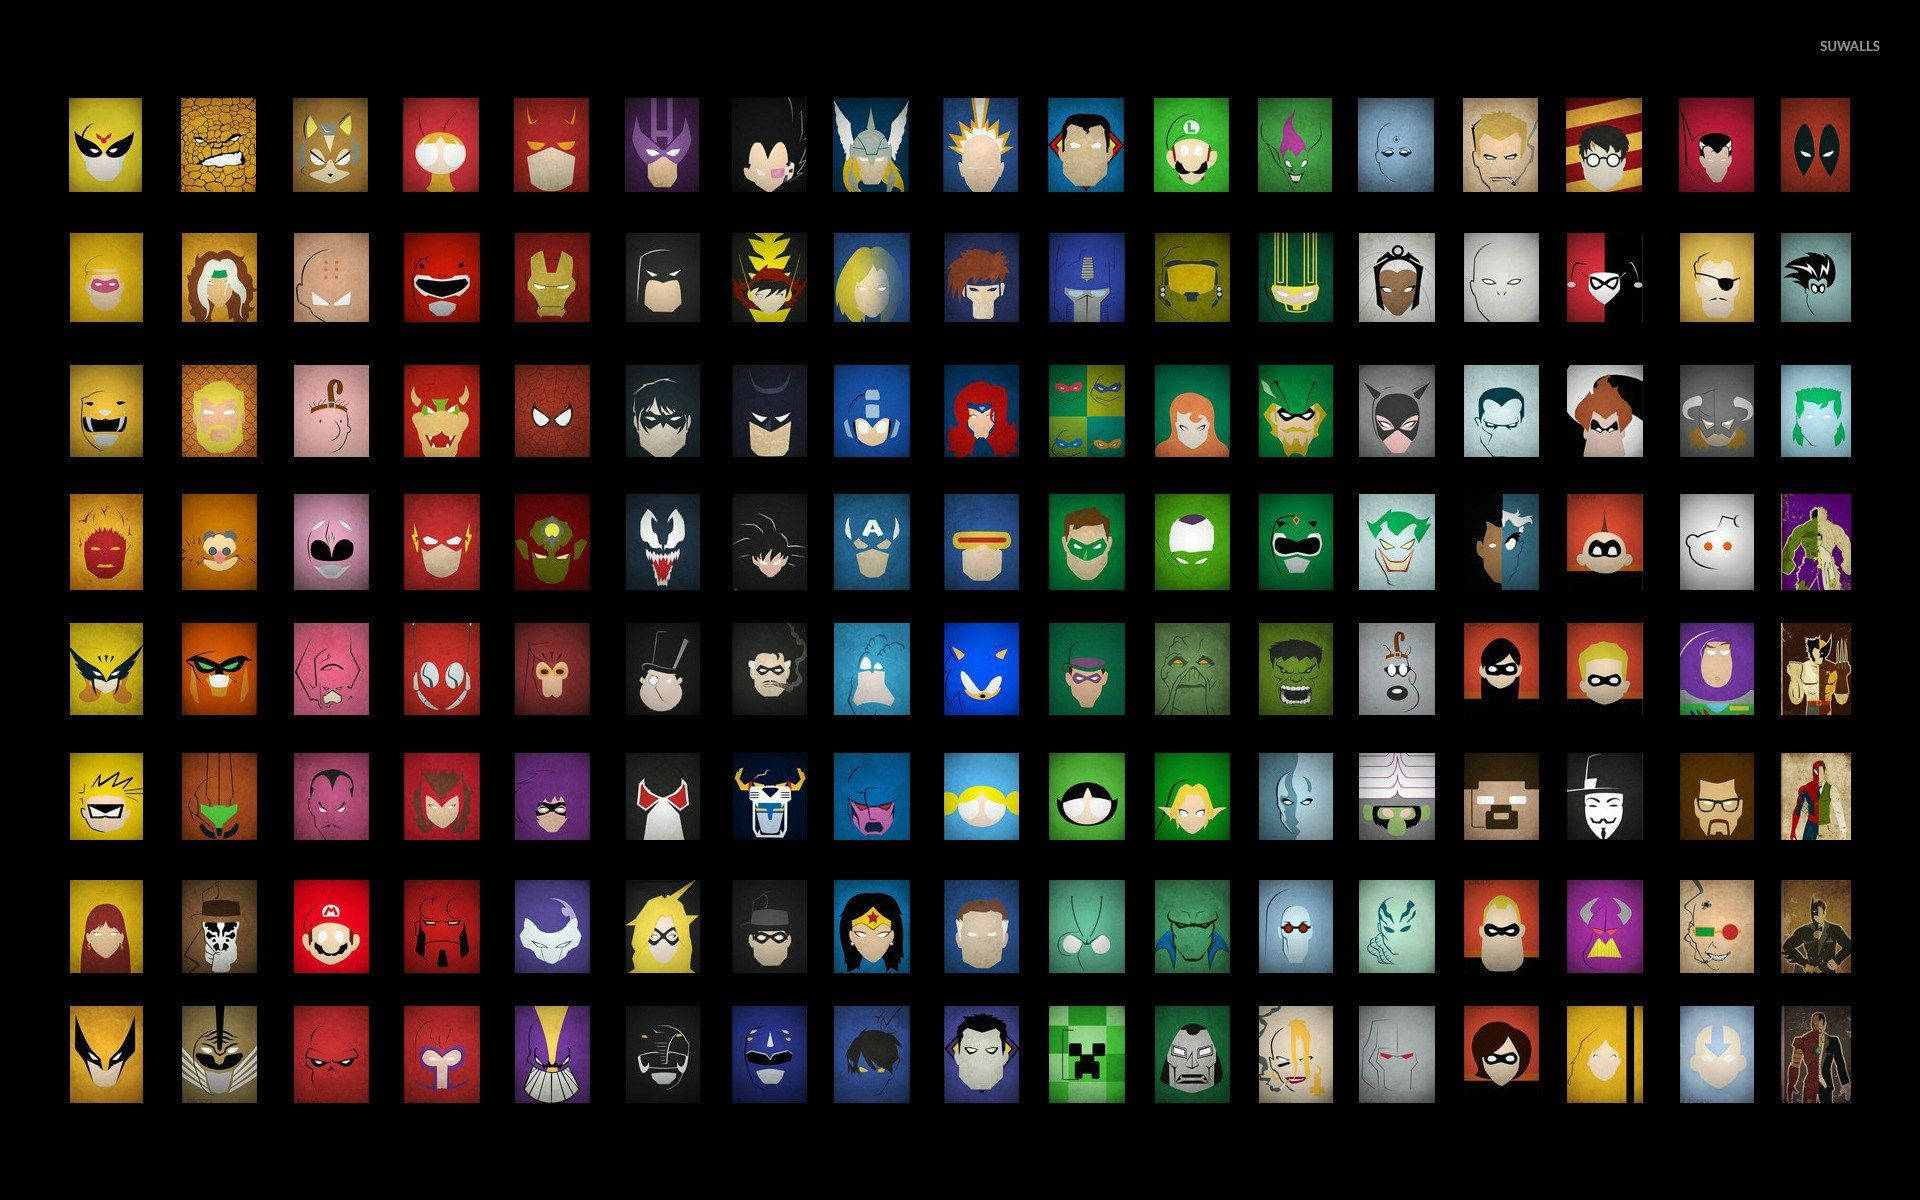 "Introducing the new line of adorable Cute Marvel characters!" Wallpaper